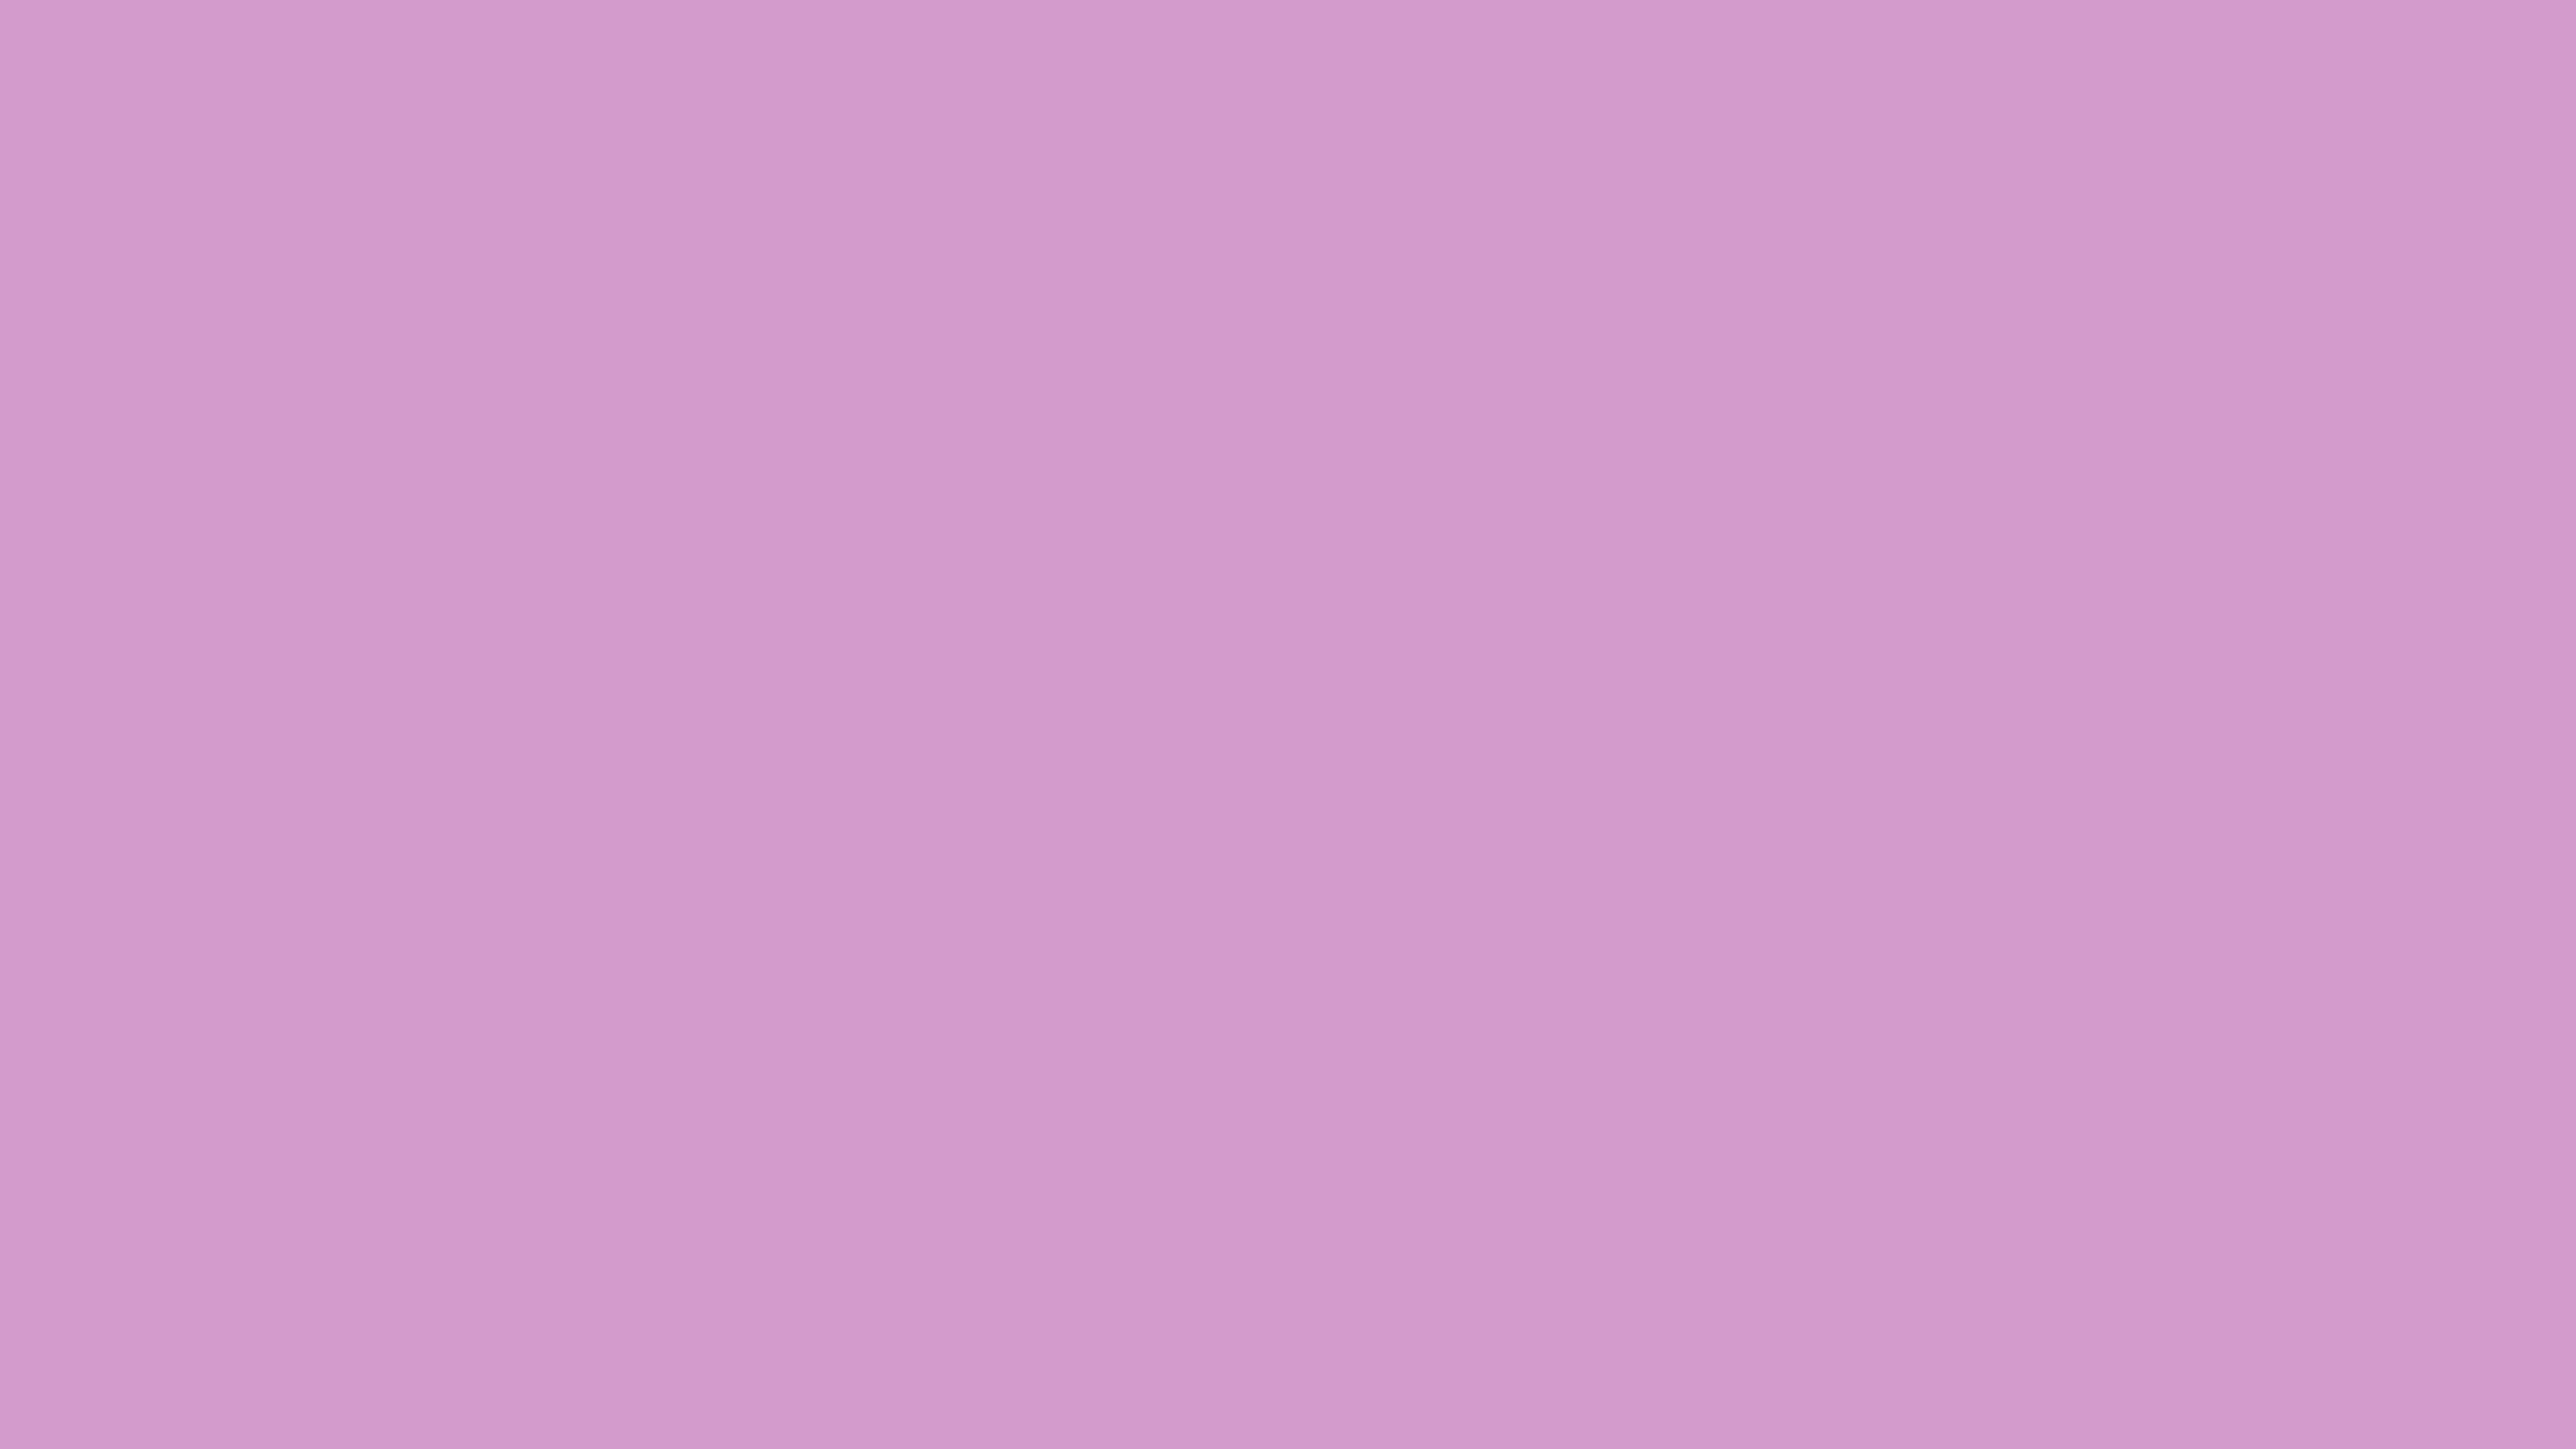 4096x2304 Light Medium Orchid Solid Color Background